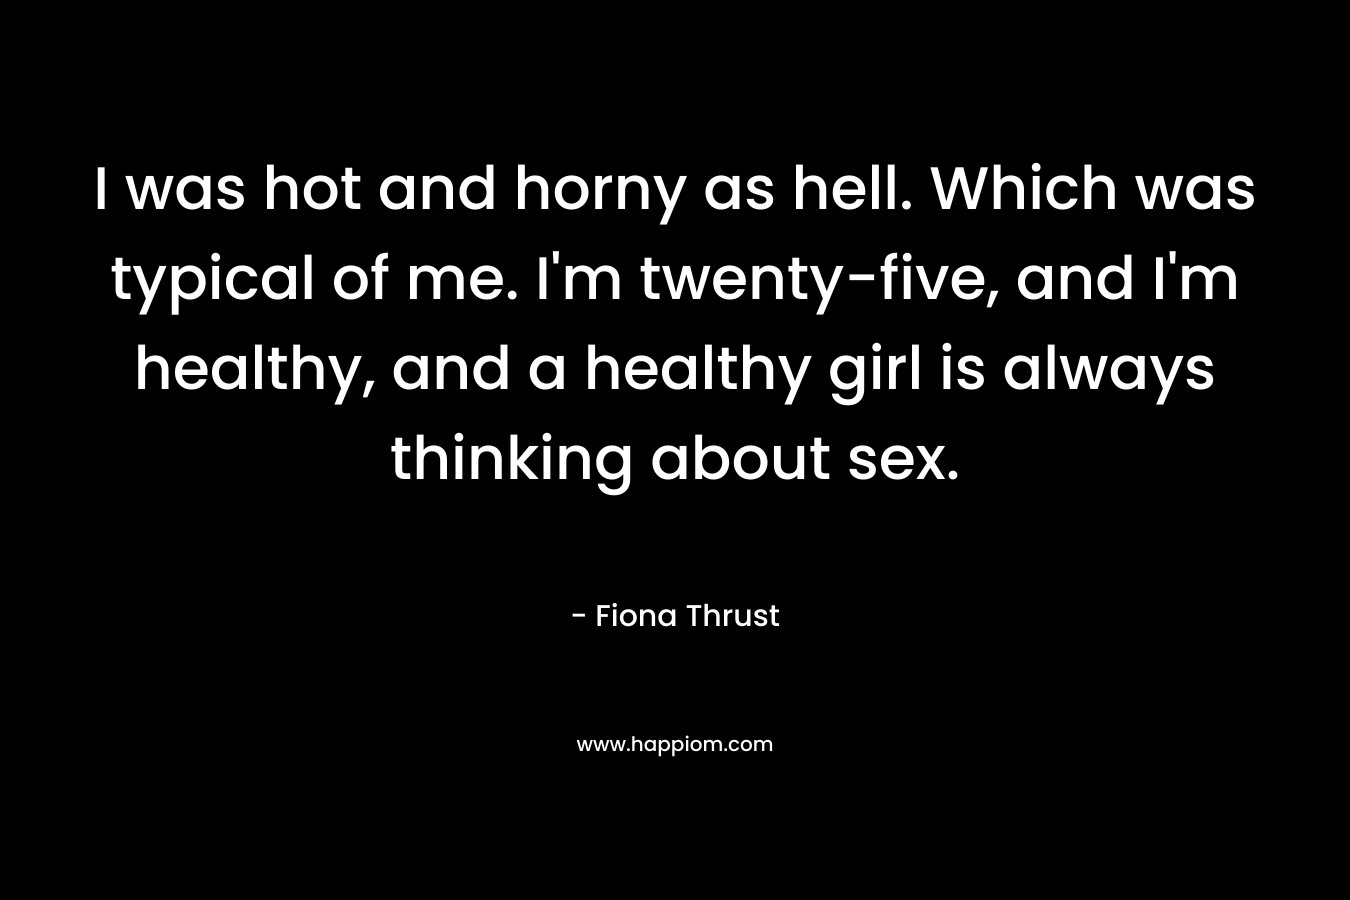 I was hot and horny as hell. Which was typical of me. I'm twenty-five, and I'm healthy, and a healthy girl is always thinking about sex.